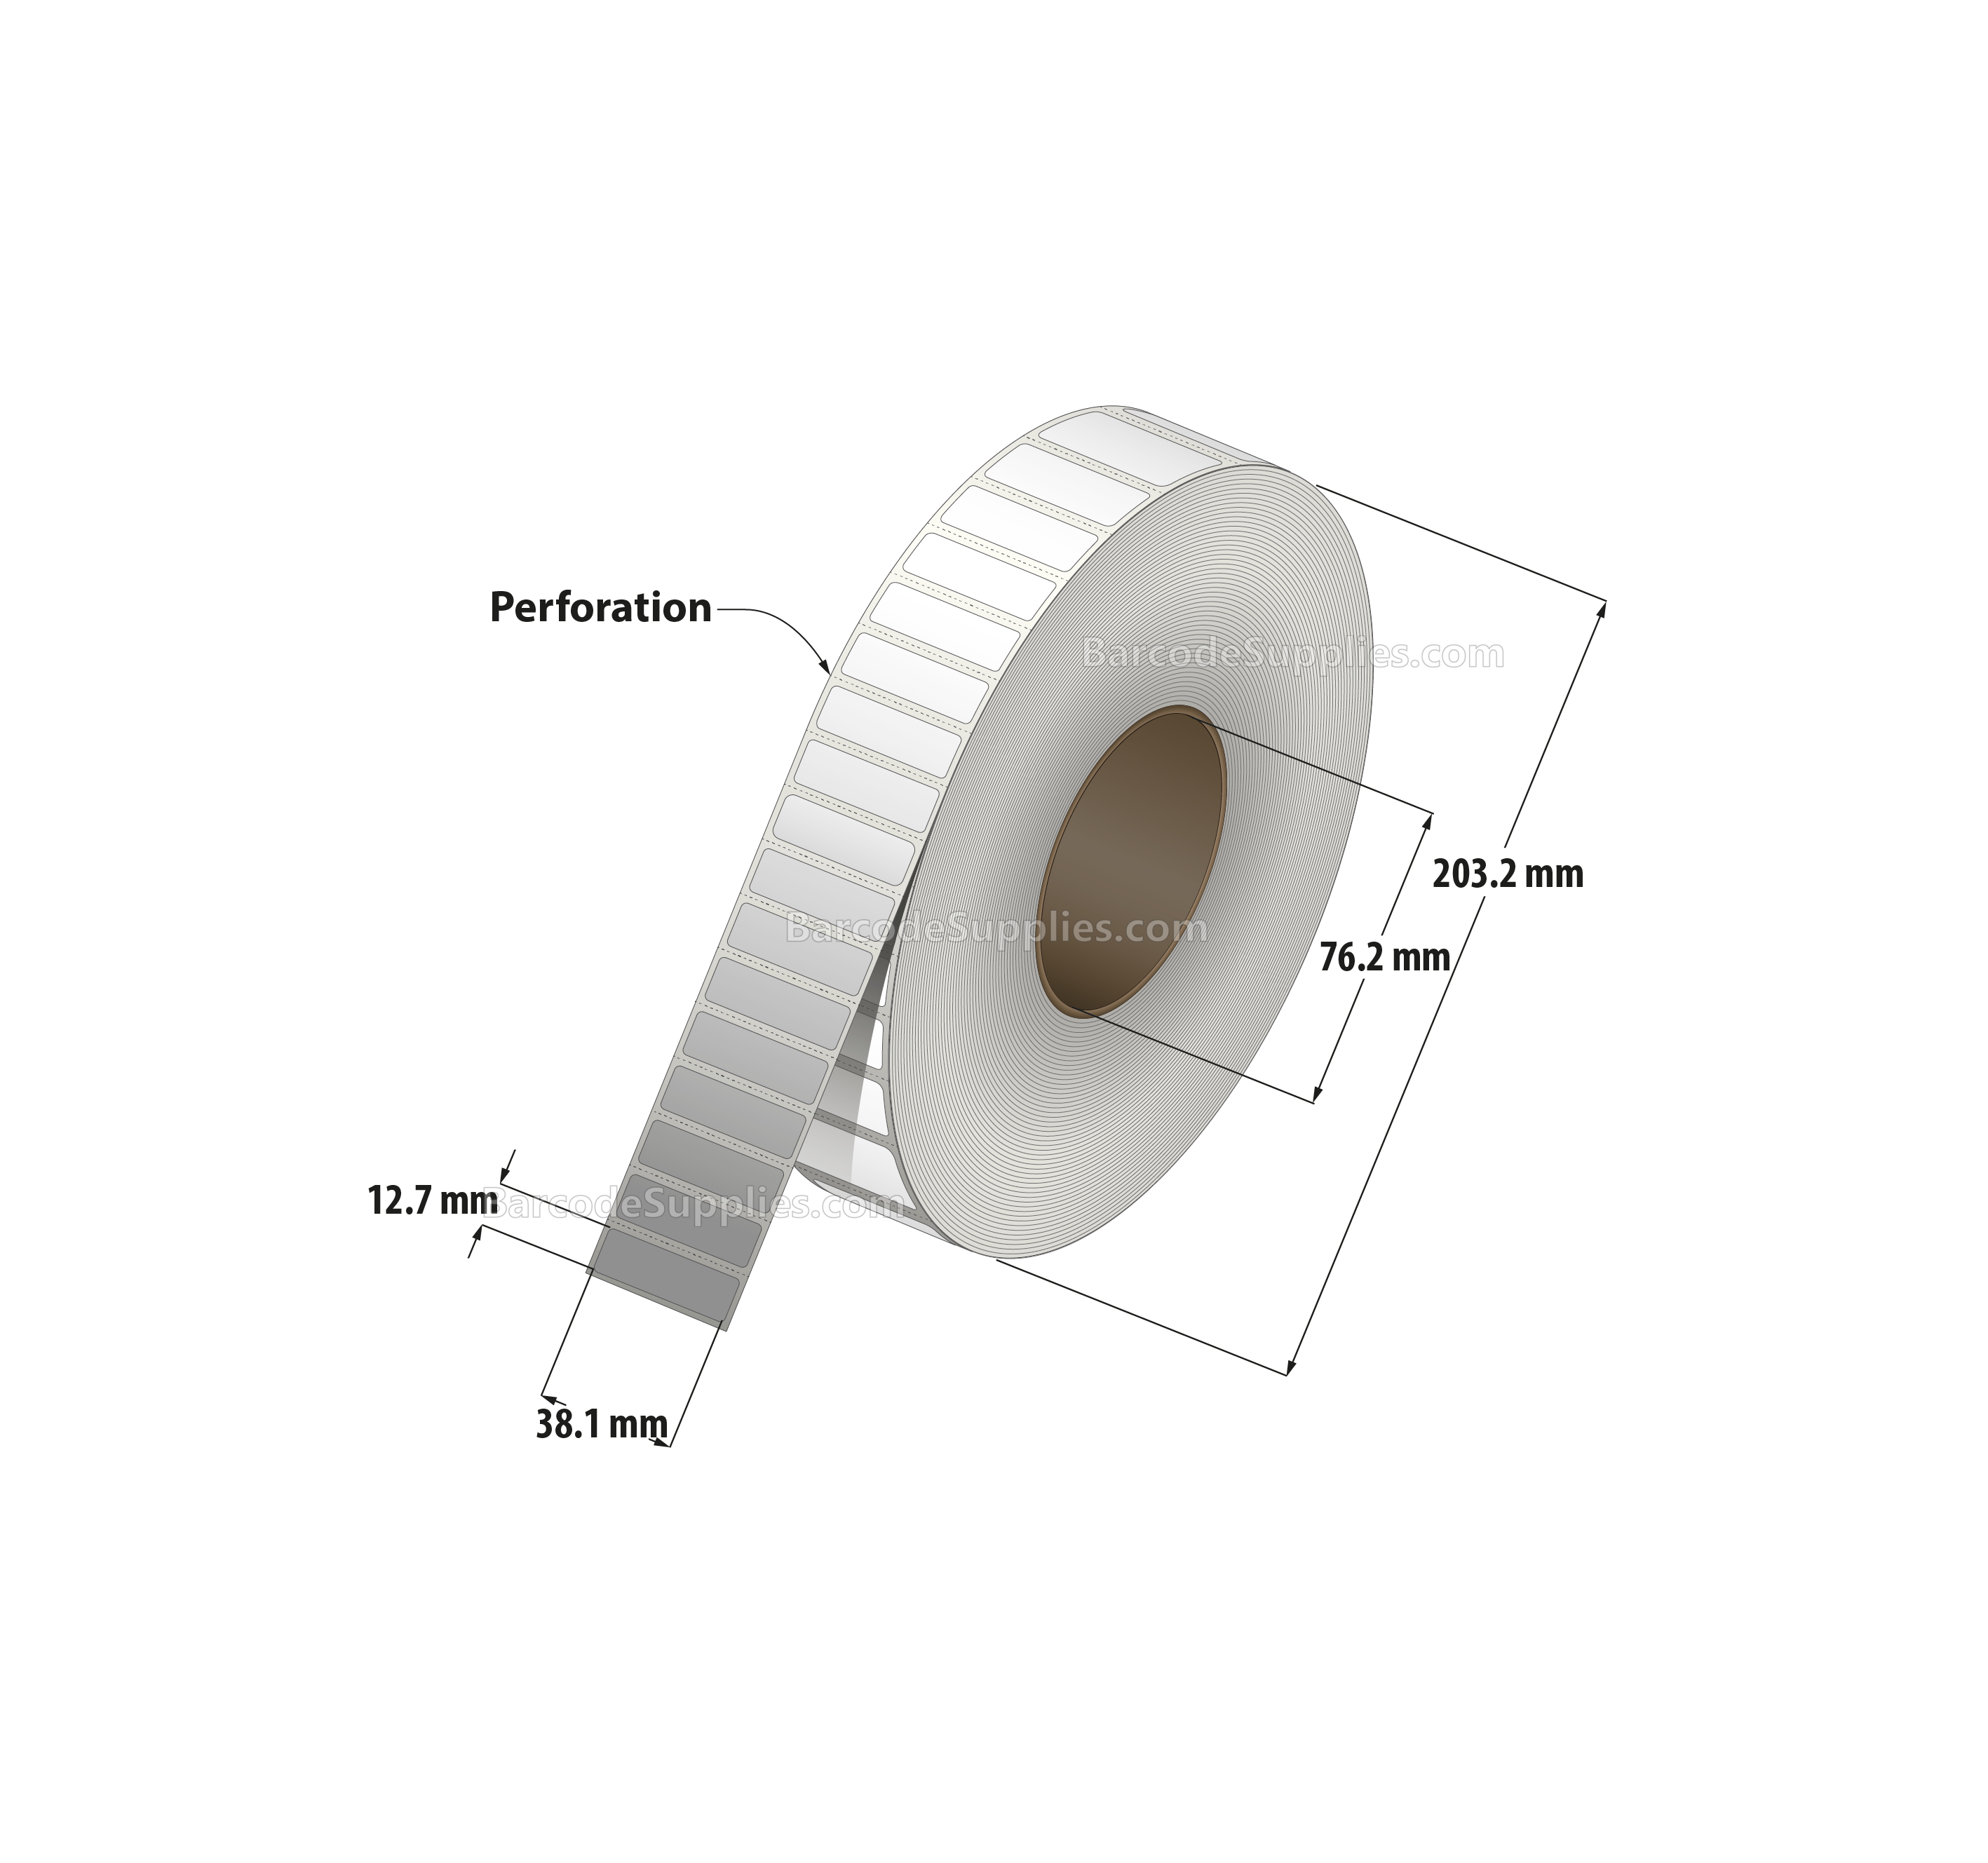 1.5 x 0.5 Thermal Transfer White Labels With Permanent Adhesive - Perforated - 9600 Labels Per Roll - Carton Of 8 Rolls - 76800 Labels Total - MPN: RT-15-05-9600-3